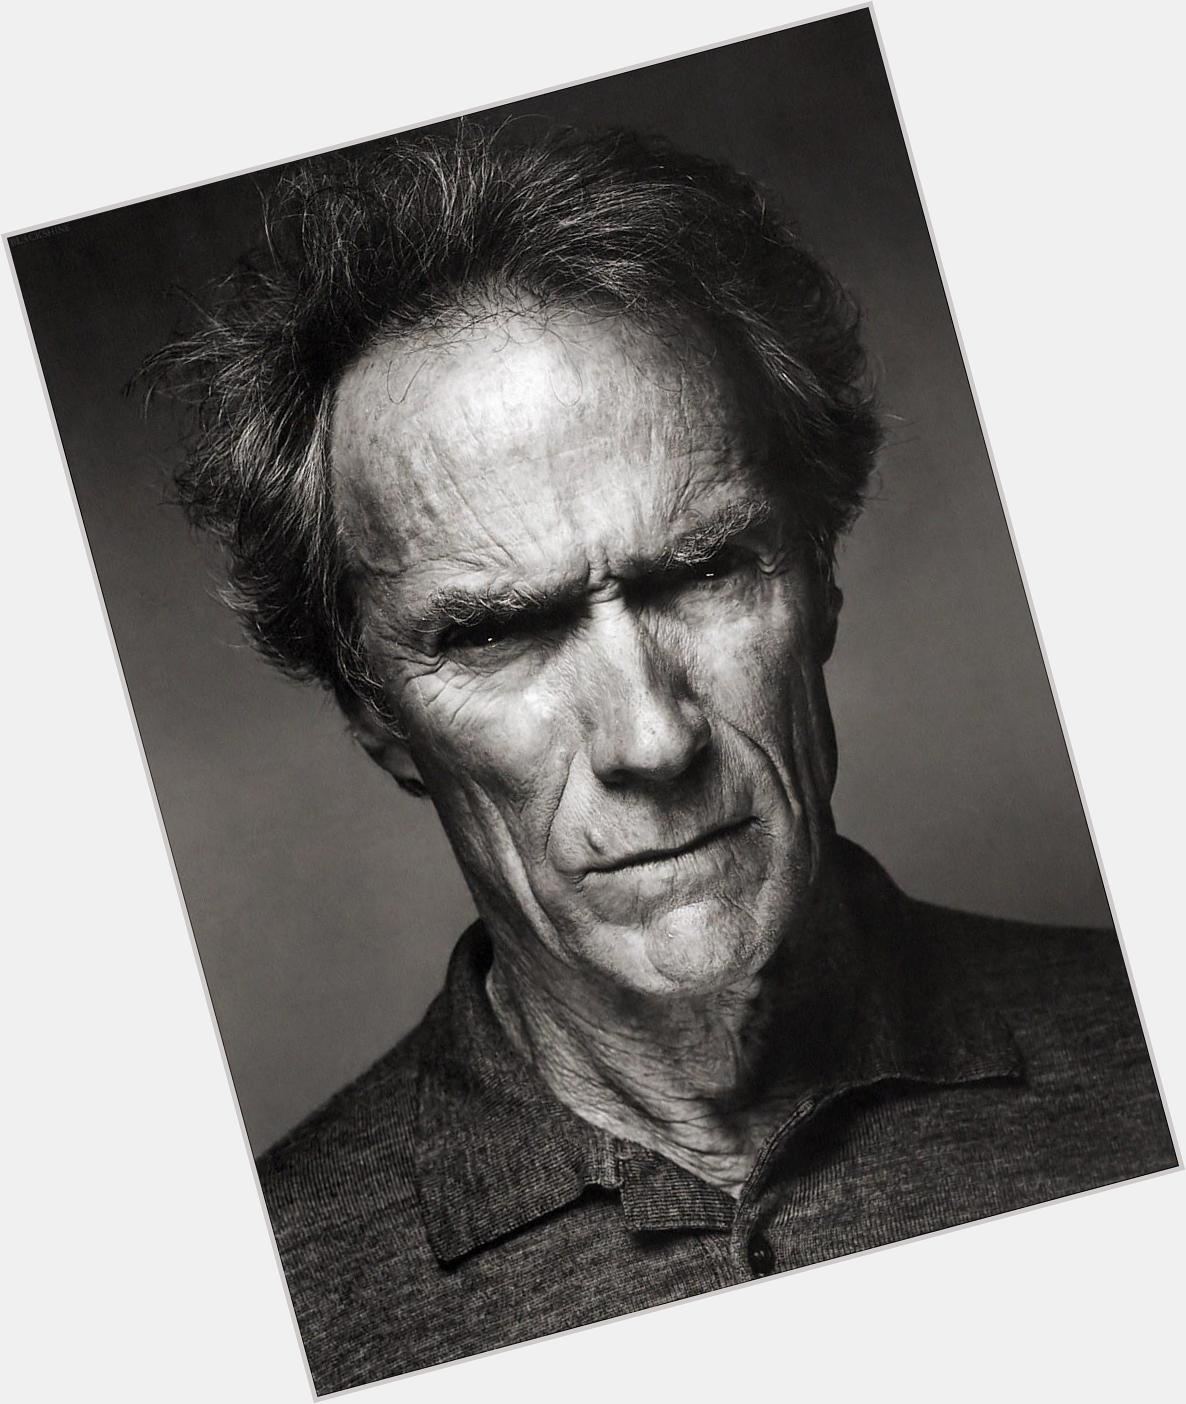 Happy 85th birthday to Clint Eastwood. 